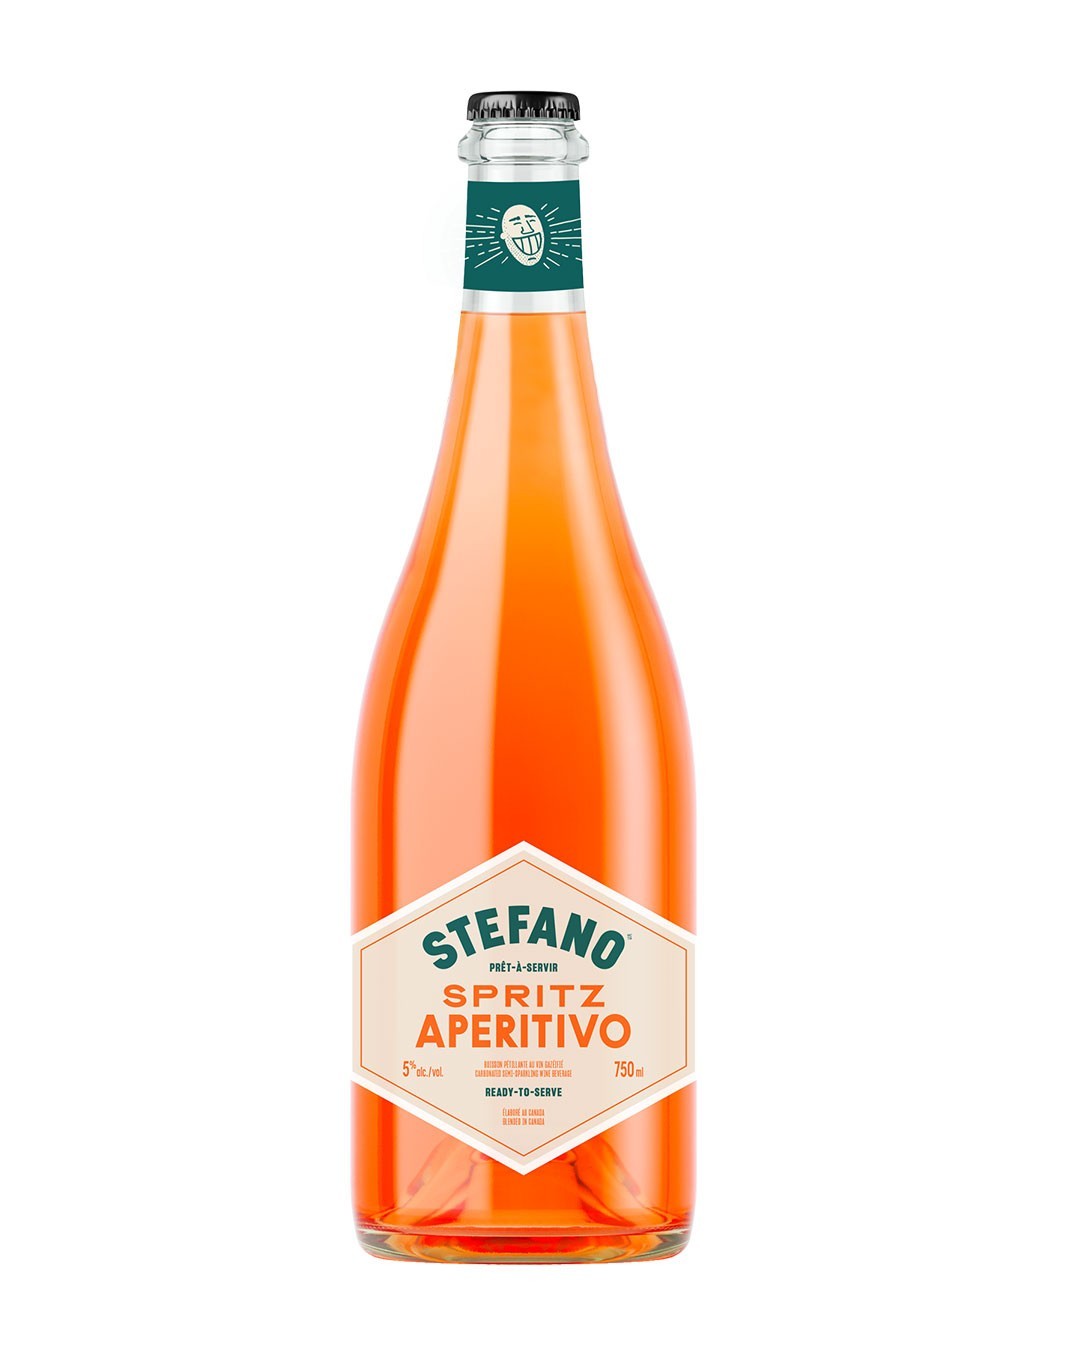 Stefano Spritz Aperitivo is a shortcut to the simple and sophisticated Italian dolce vita. Made with our Catarratto white wine, sparkling water, and an herbal infusion and bitter orange zest, it’s a practical, authentic, and delicious ready-to-drink beverage: just add ice, a slice of orange, or a nice juicy green olive and you’re good to go!